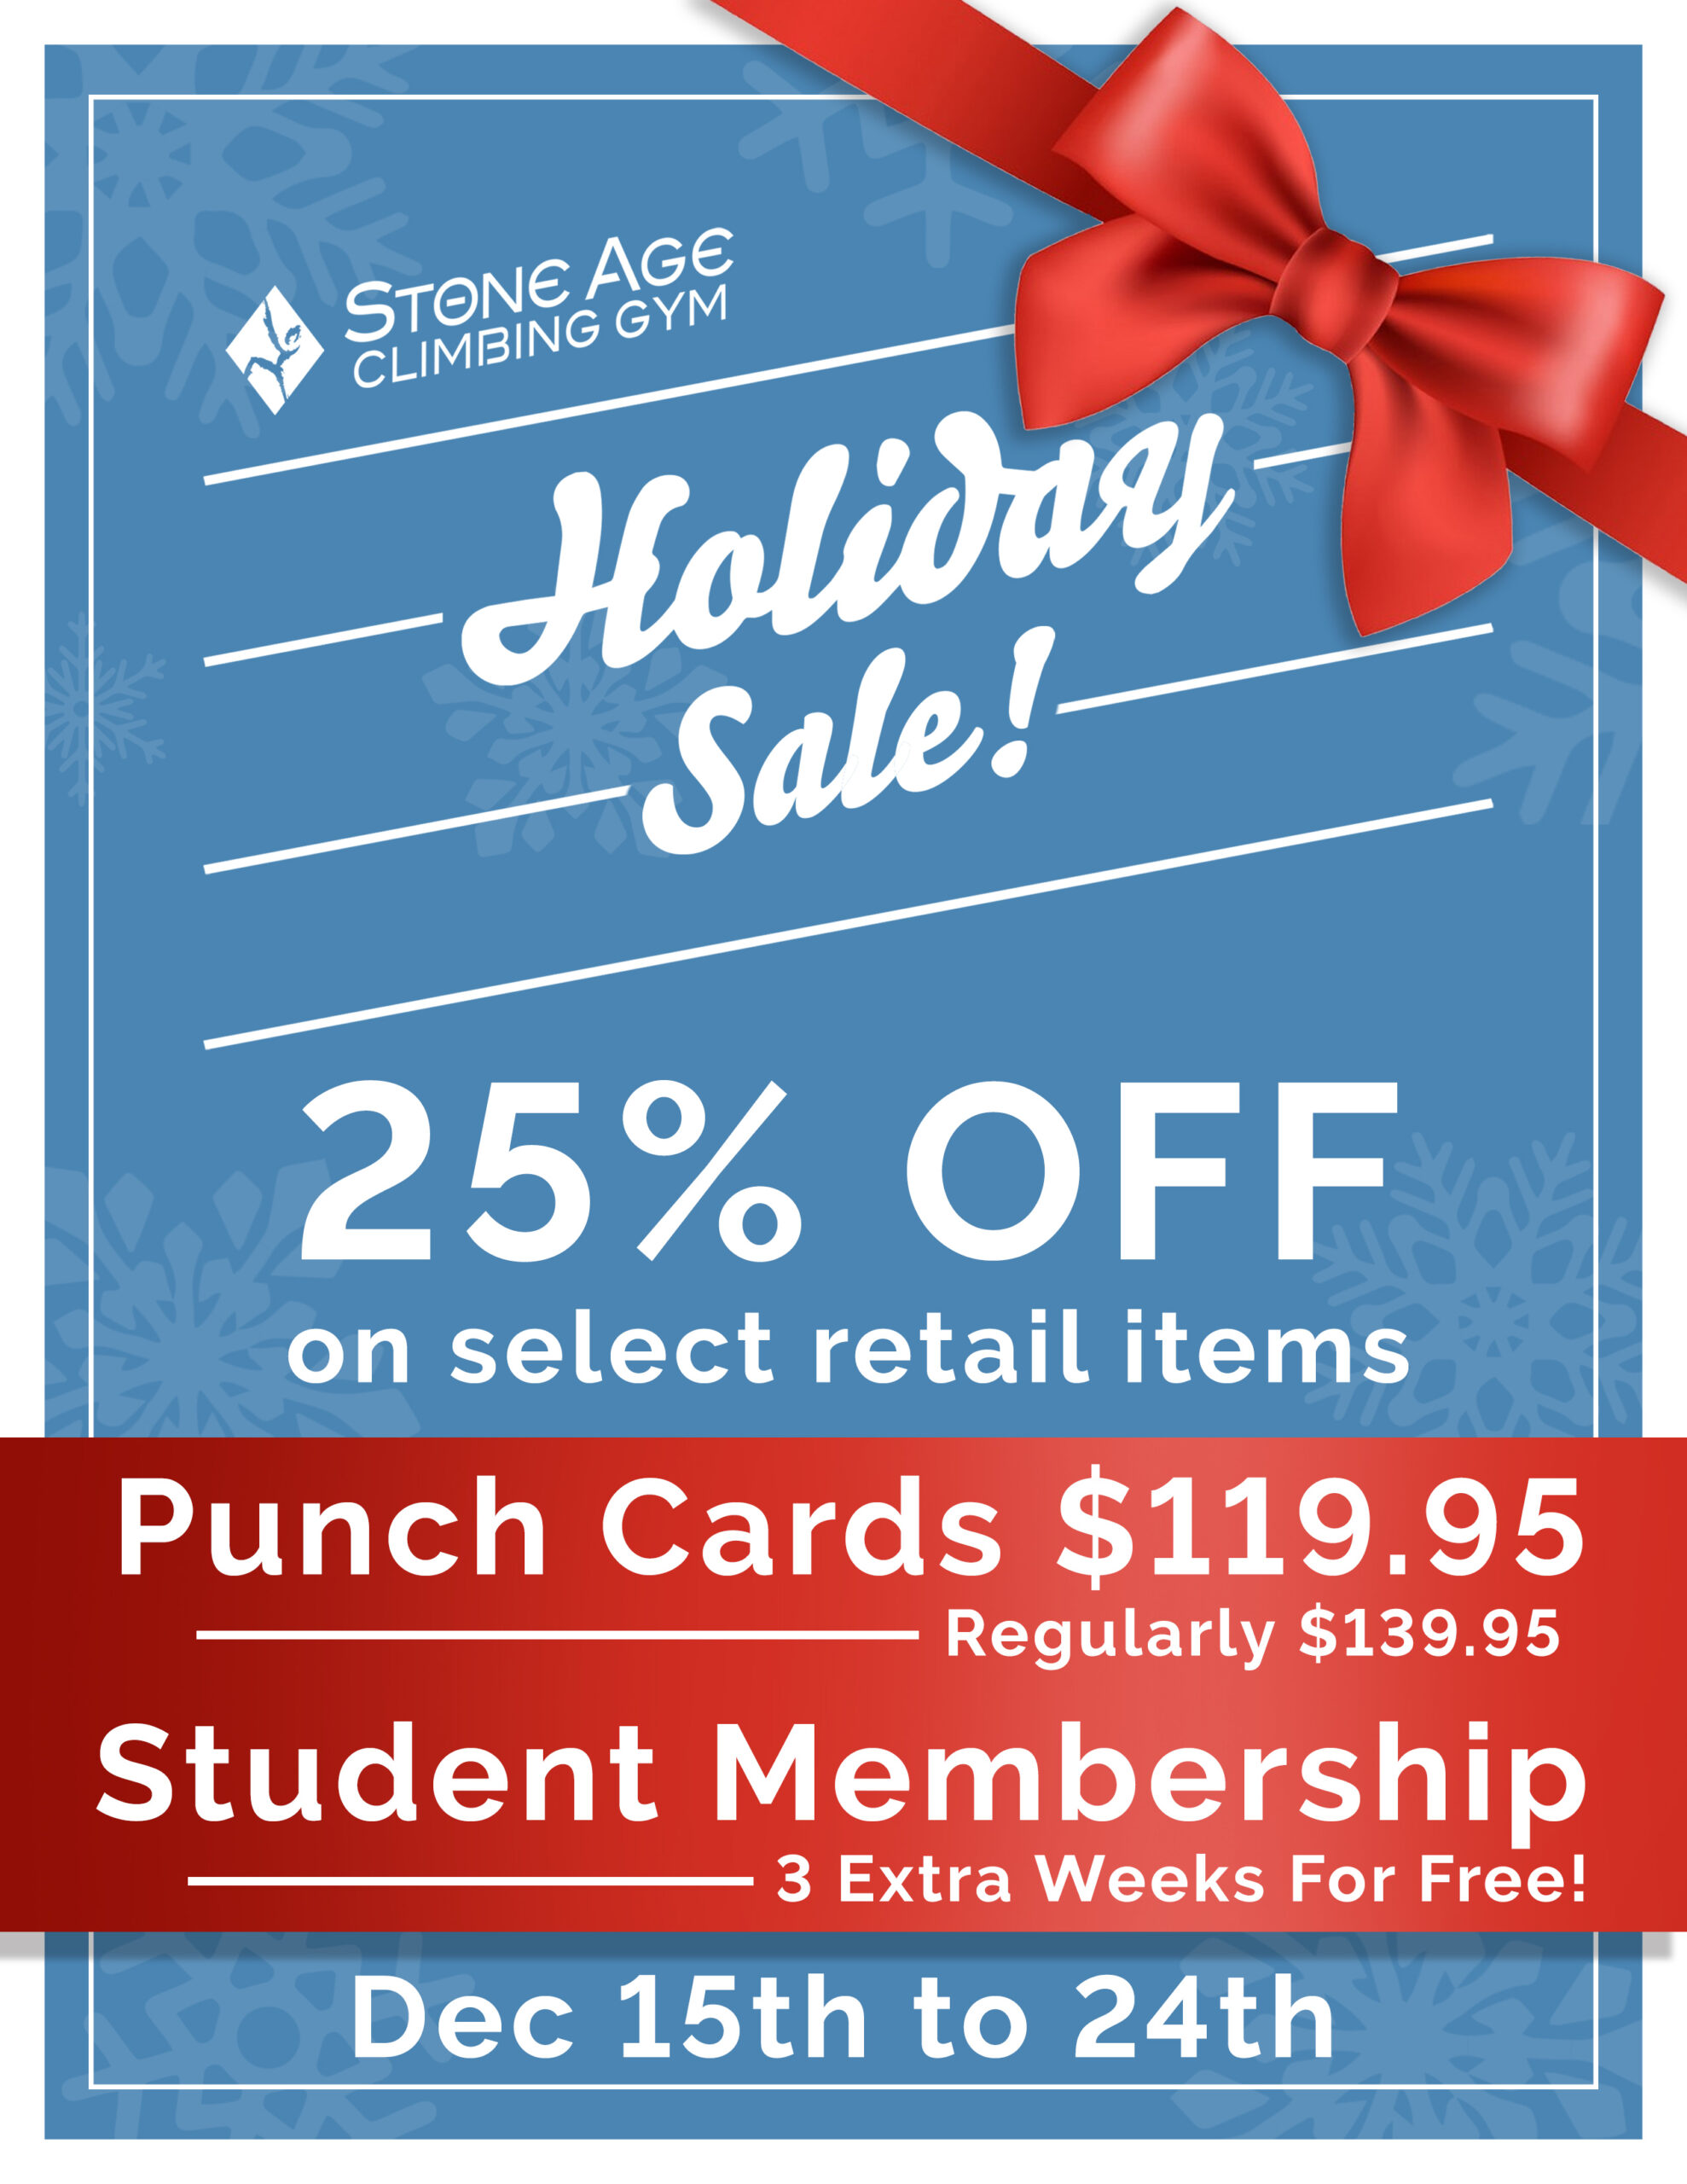 Stone Age Holiday Sale